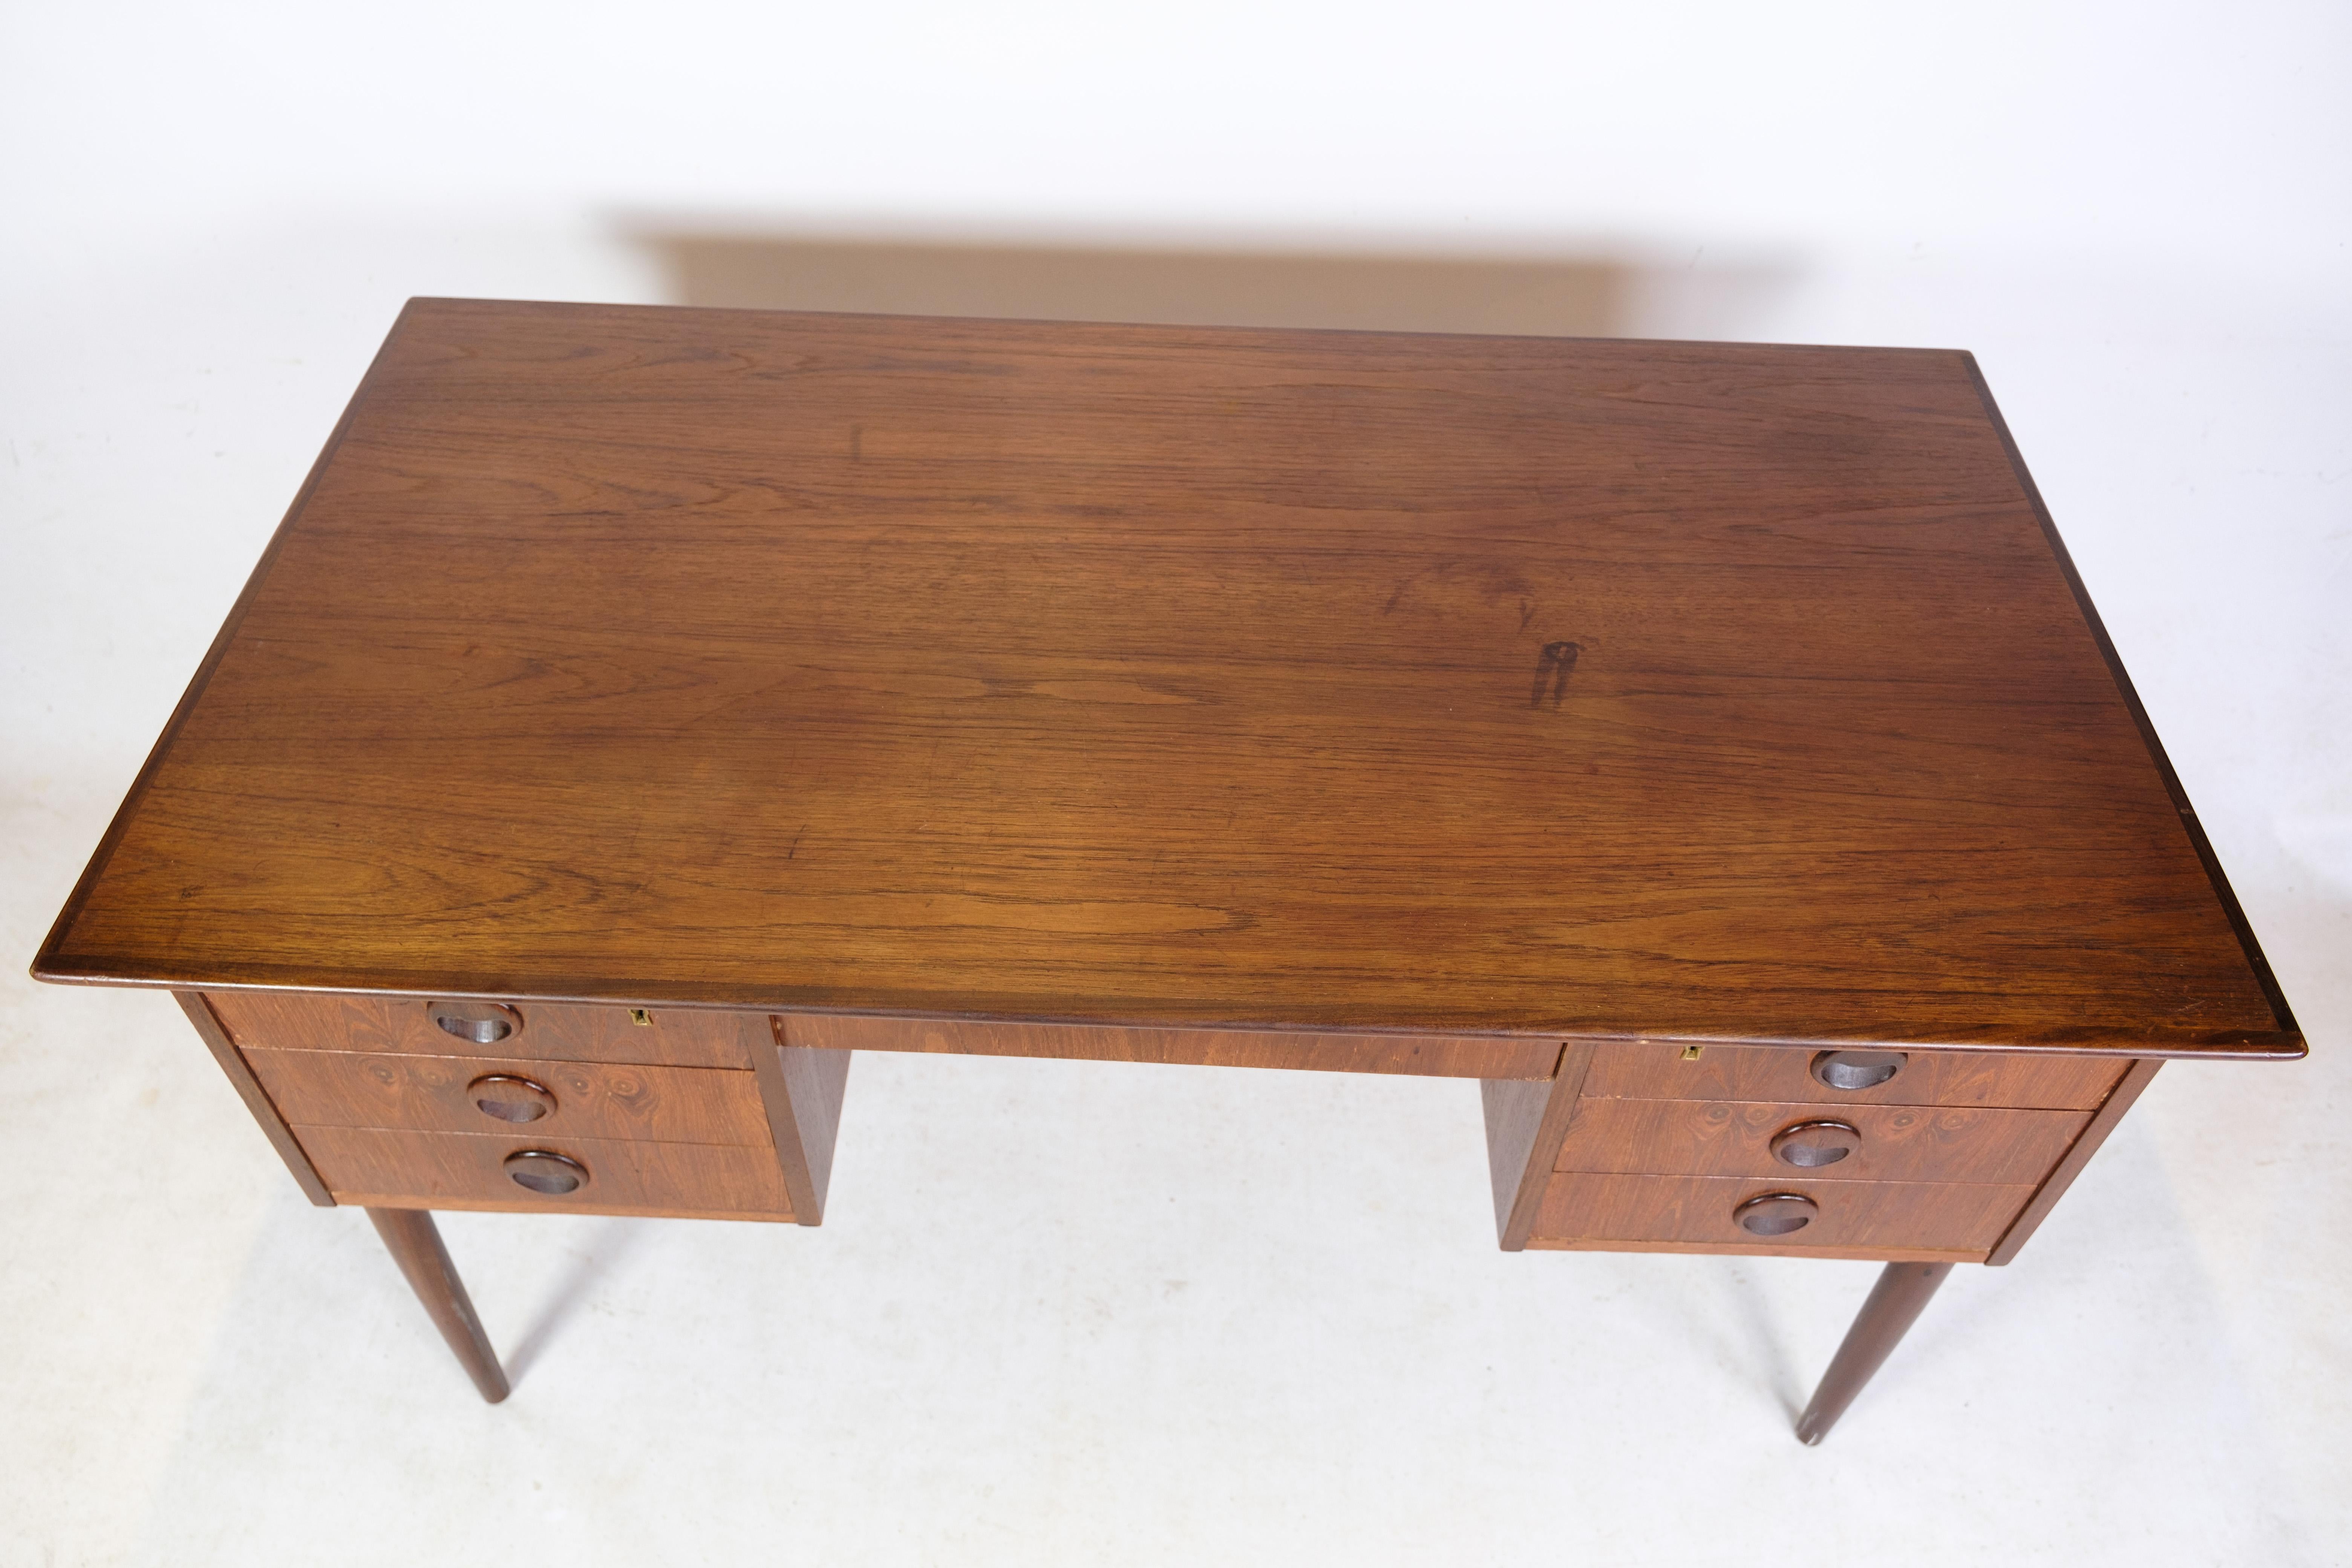 Freestanding desk in teak wood with 3 drawers on each side, as well as a drawer in the middle of Danish design from around the 1960s. Key included.
Dimensions in cm: H:72 W:130 D:70
Measurements between the 2 drawers: H:71 W:48.5 D:42